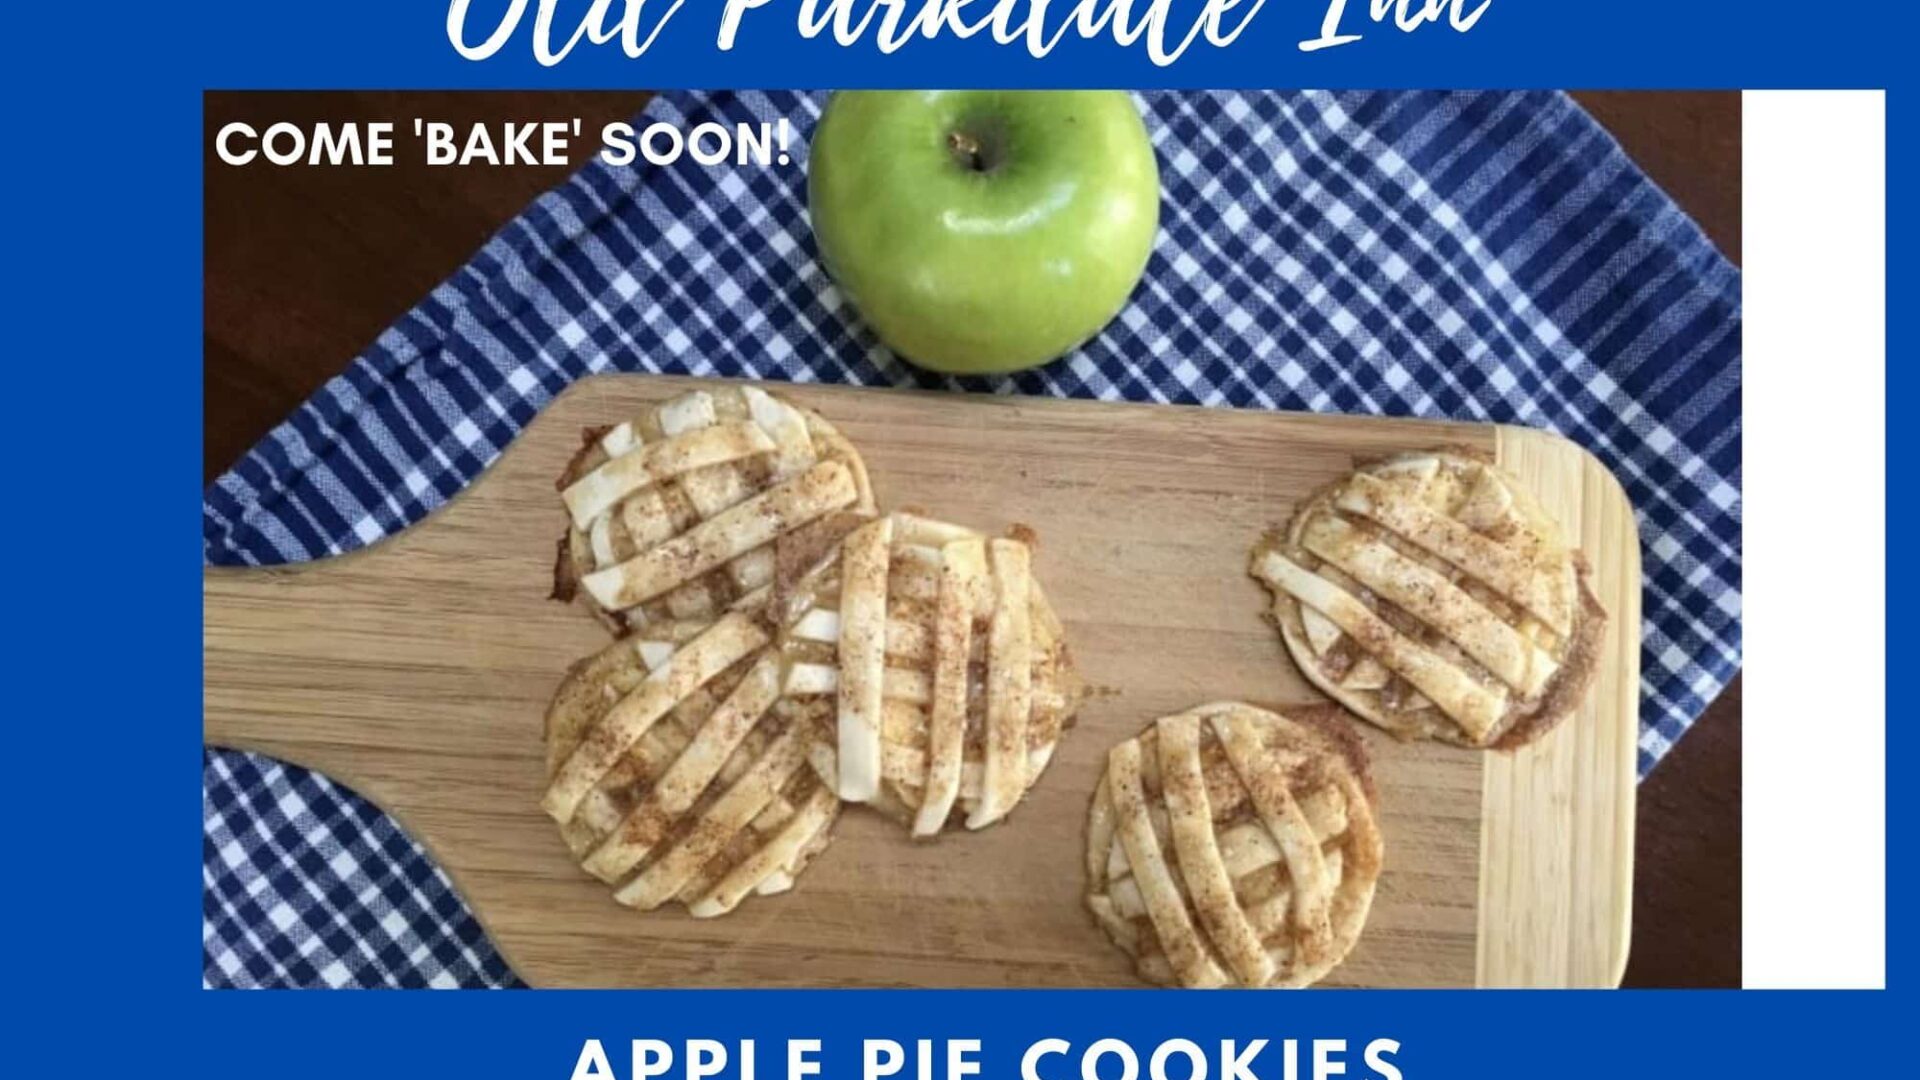 Apple Pie Cookies on a wooden board with a fresh green apple